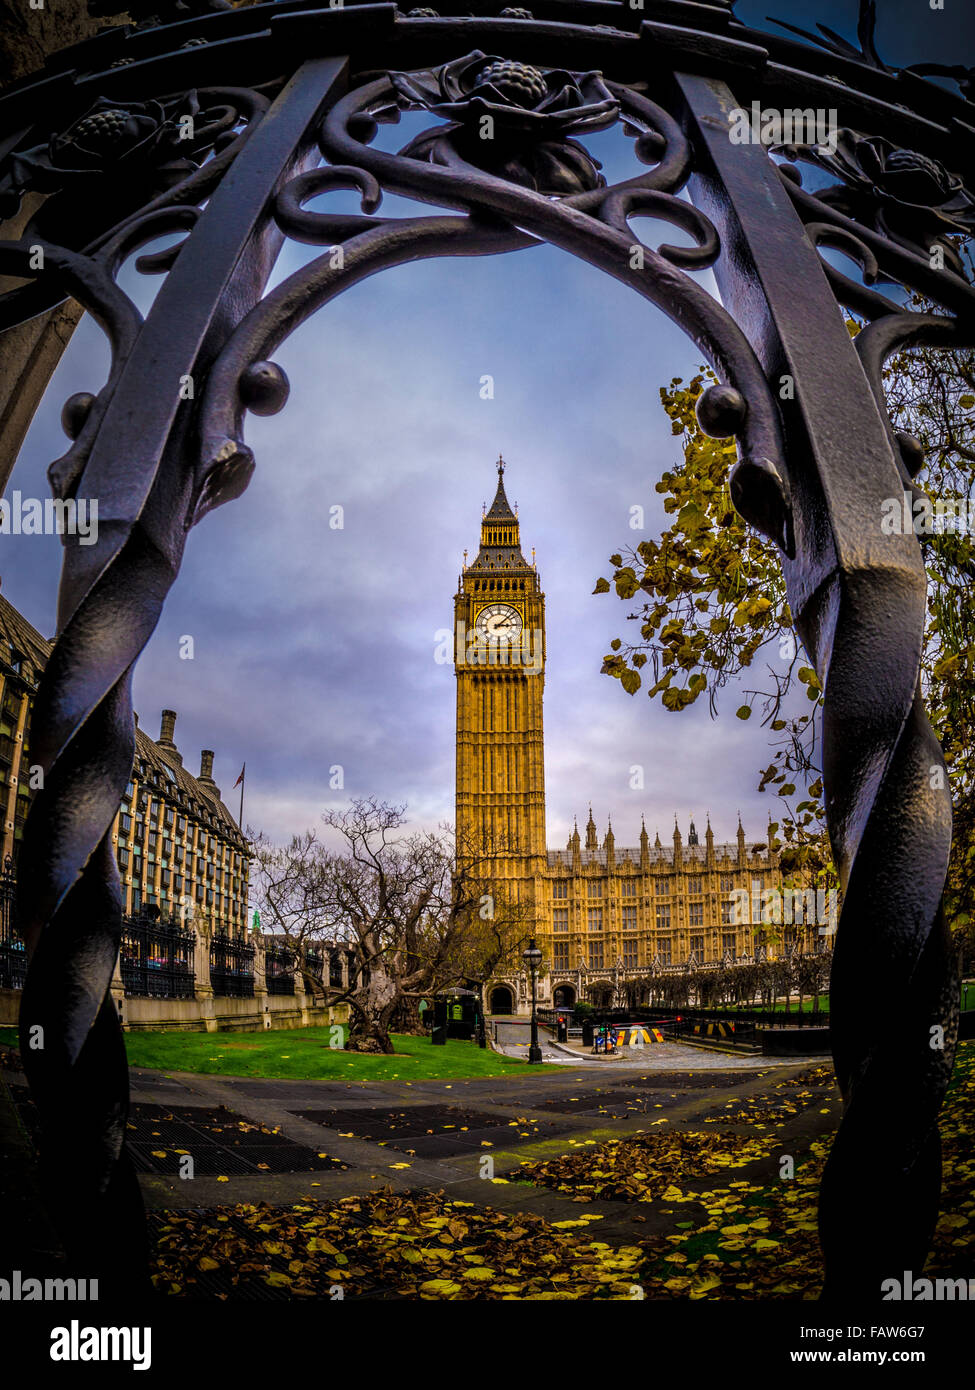 Big Ben and the Houses of Parliament, London, UK. Stock Photo